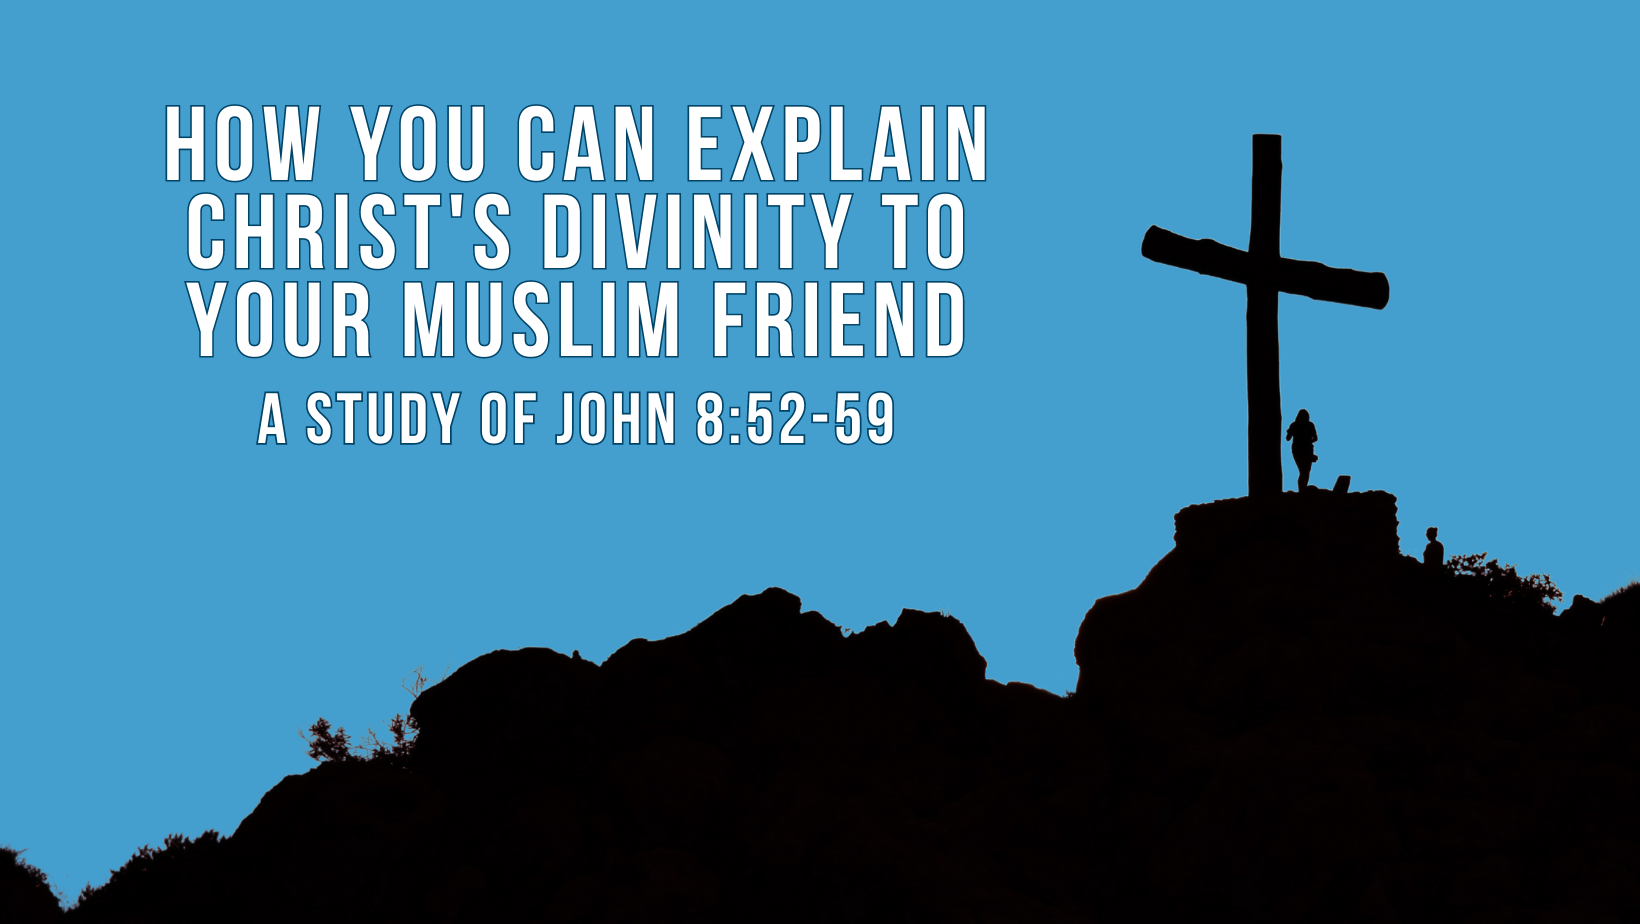 How you can explain Christ's divinity to your Muslim friend - A study of John 8:52-59